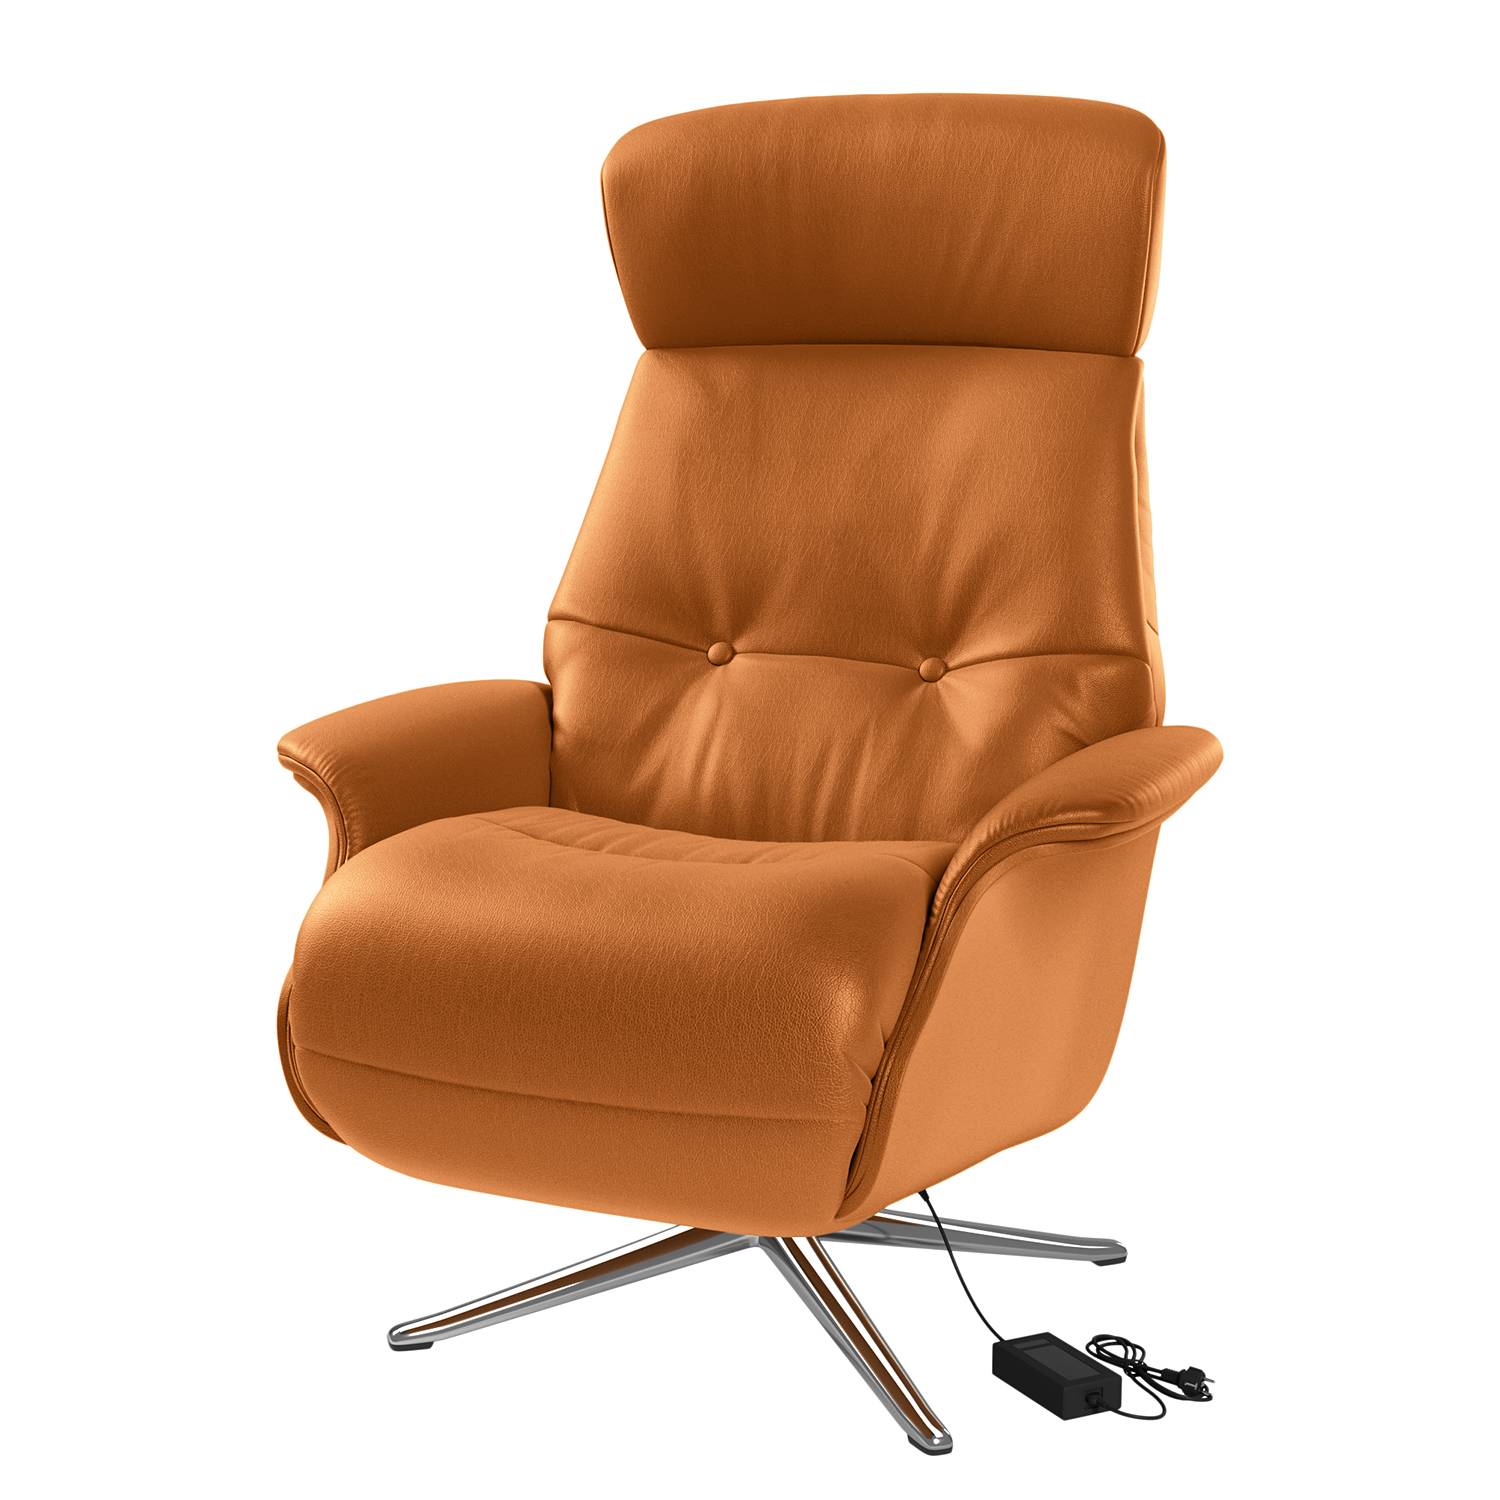 Image of Fauteuil relax Anderson VI 000000001000131473